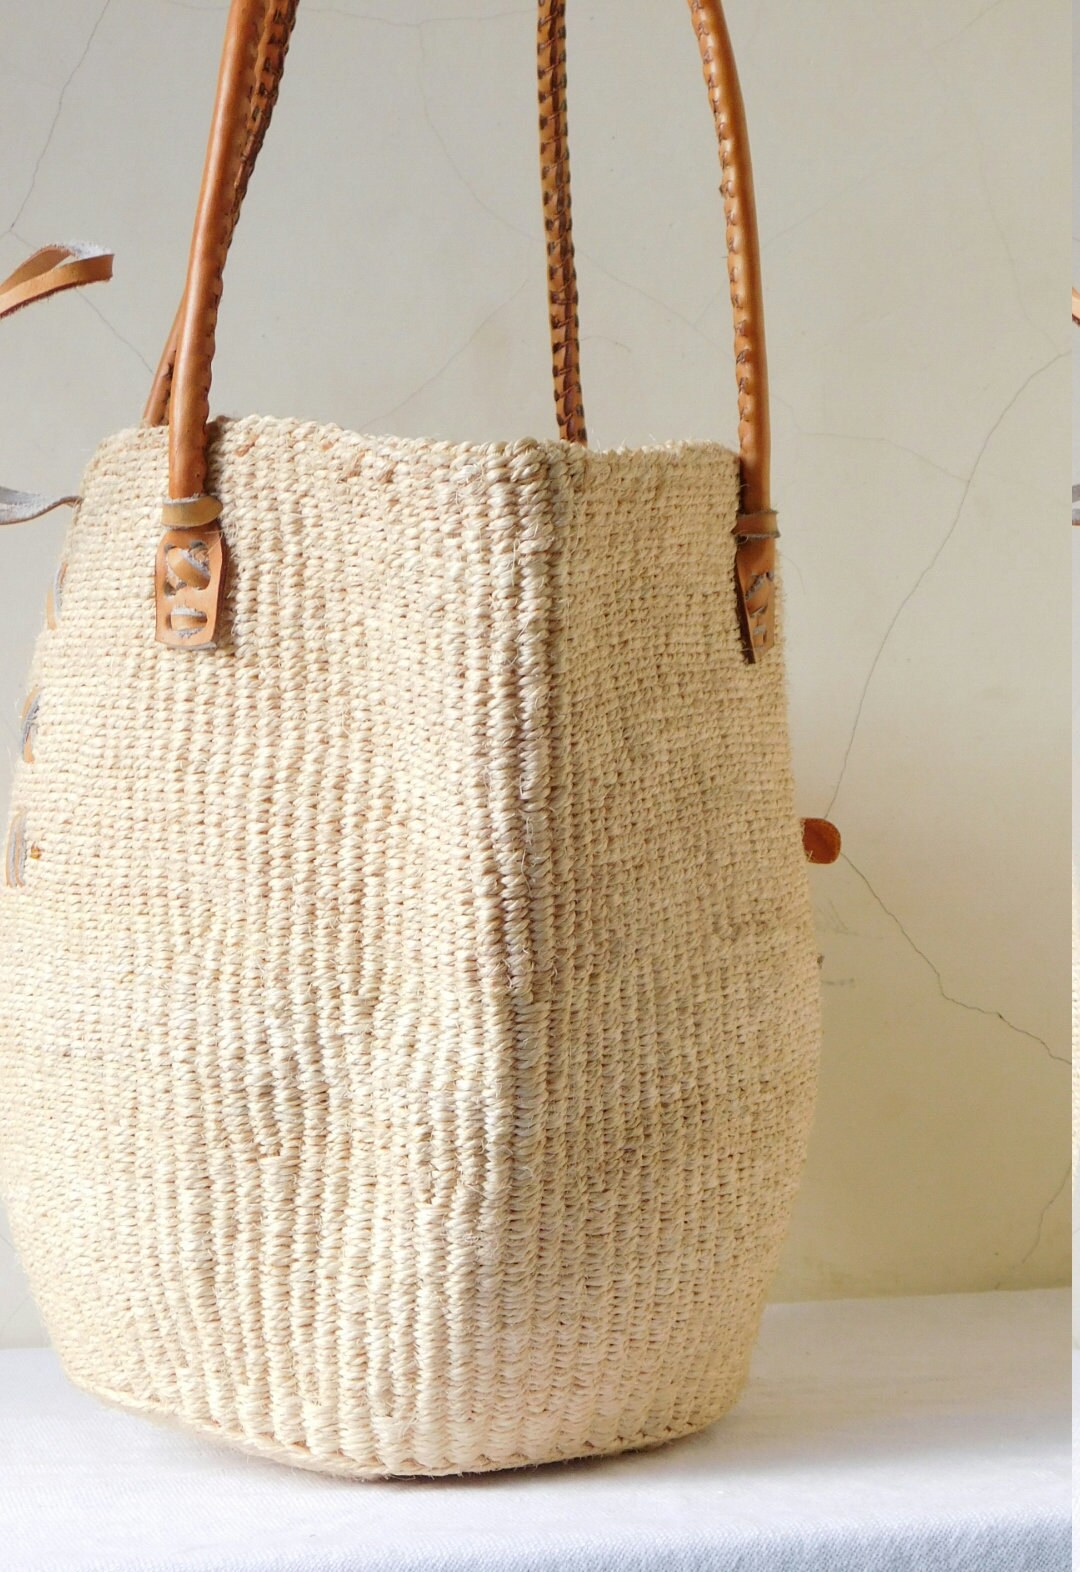 Kiondo Basket Lovely Sisal Tote Bag in White with Brown | Etsy